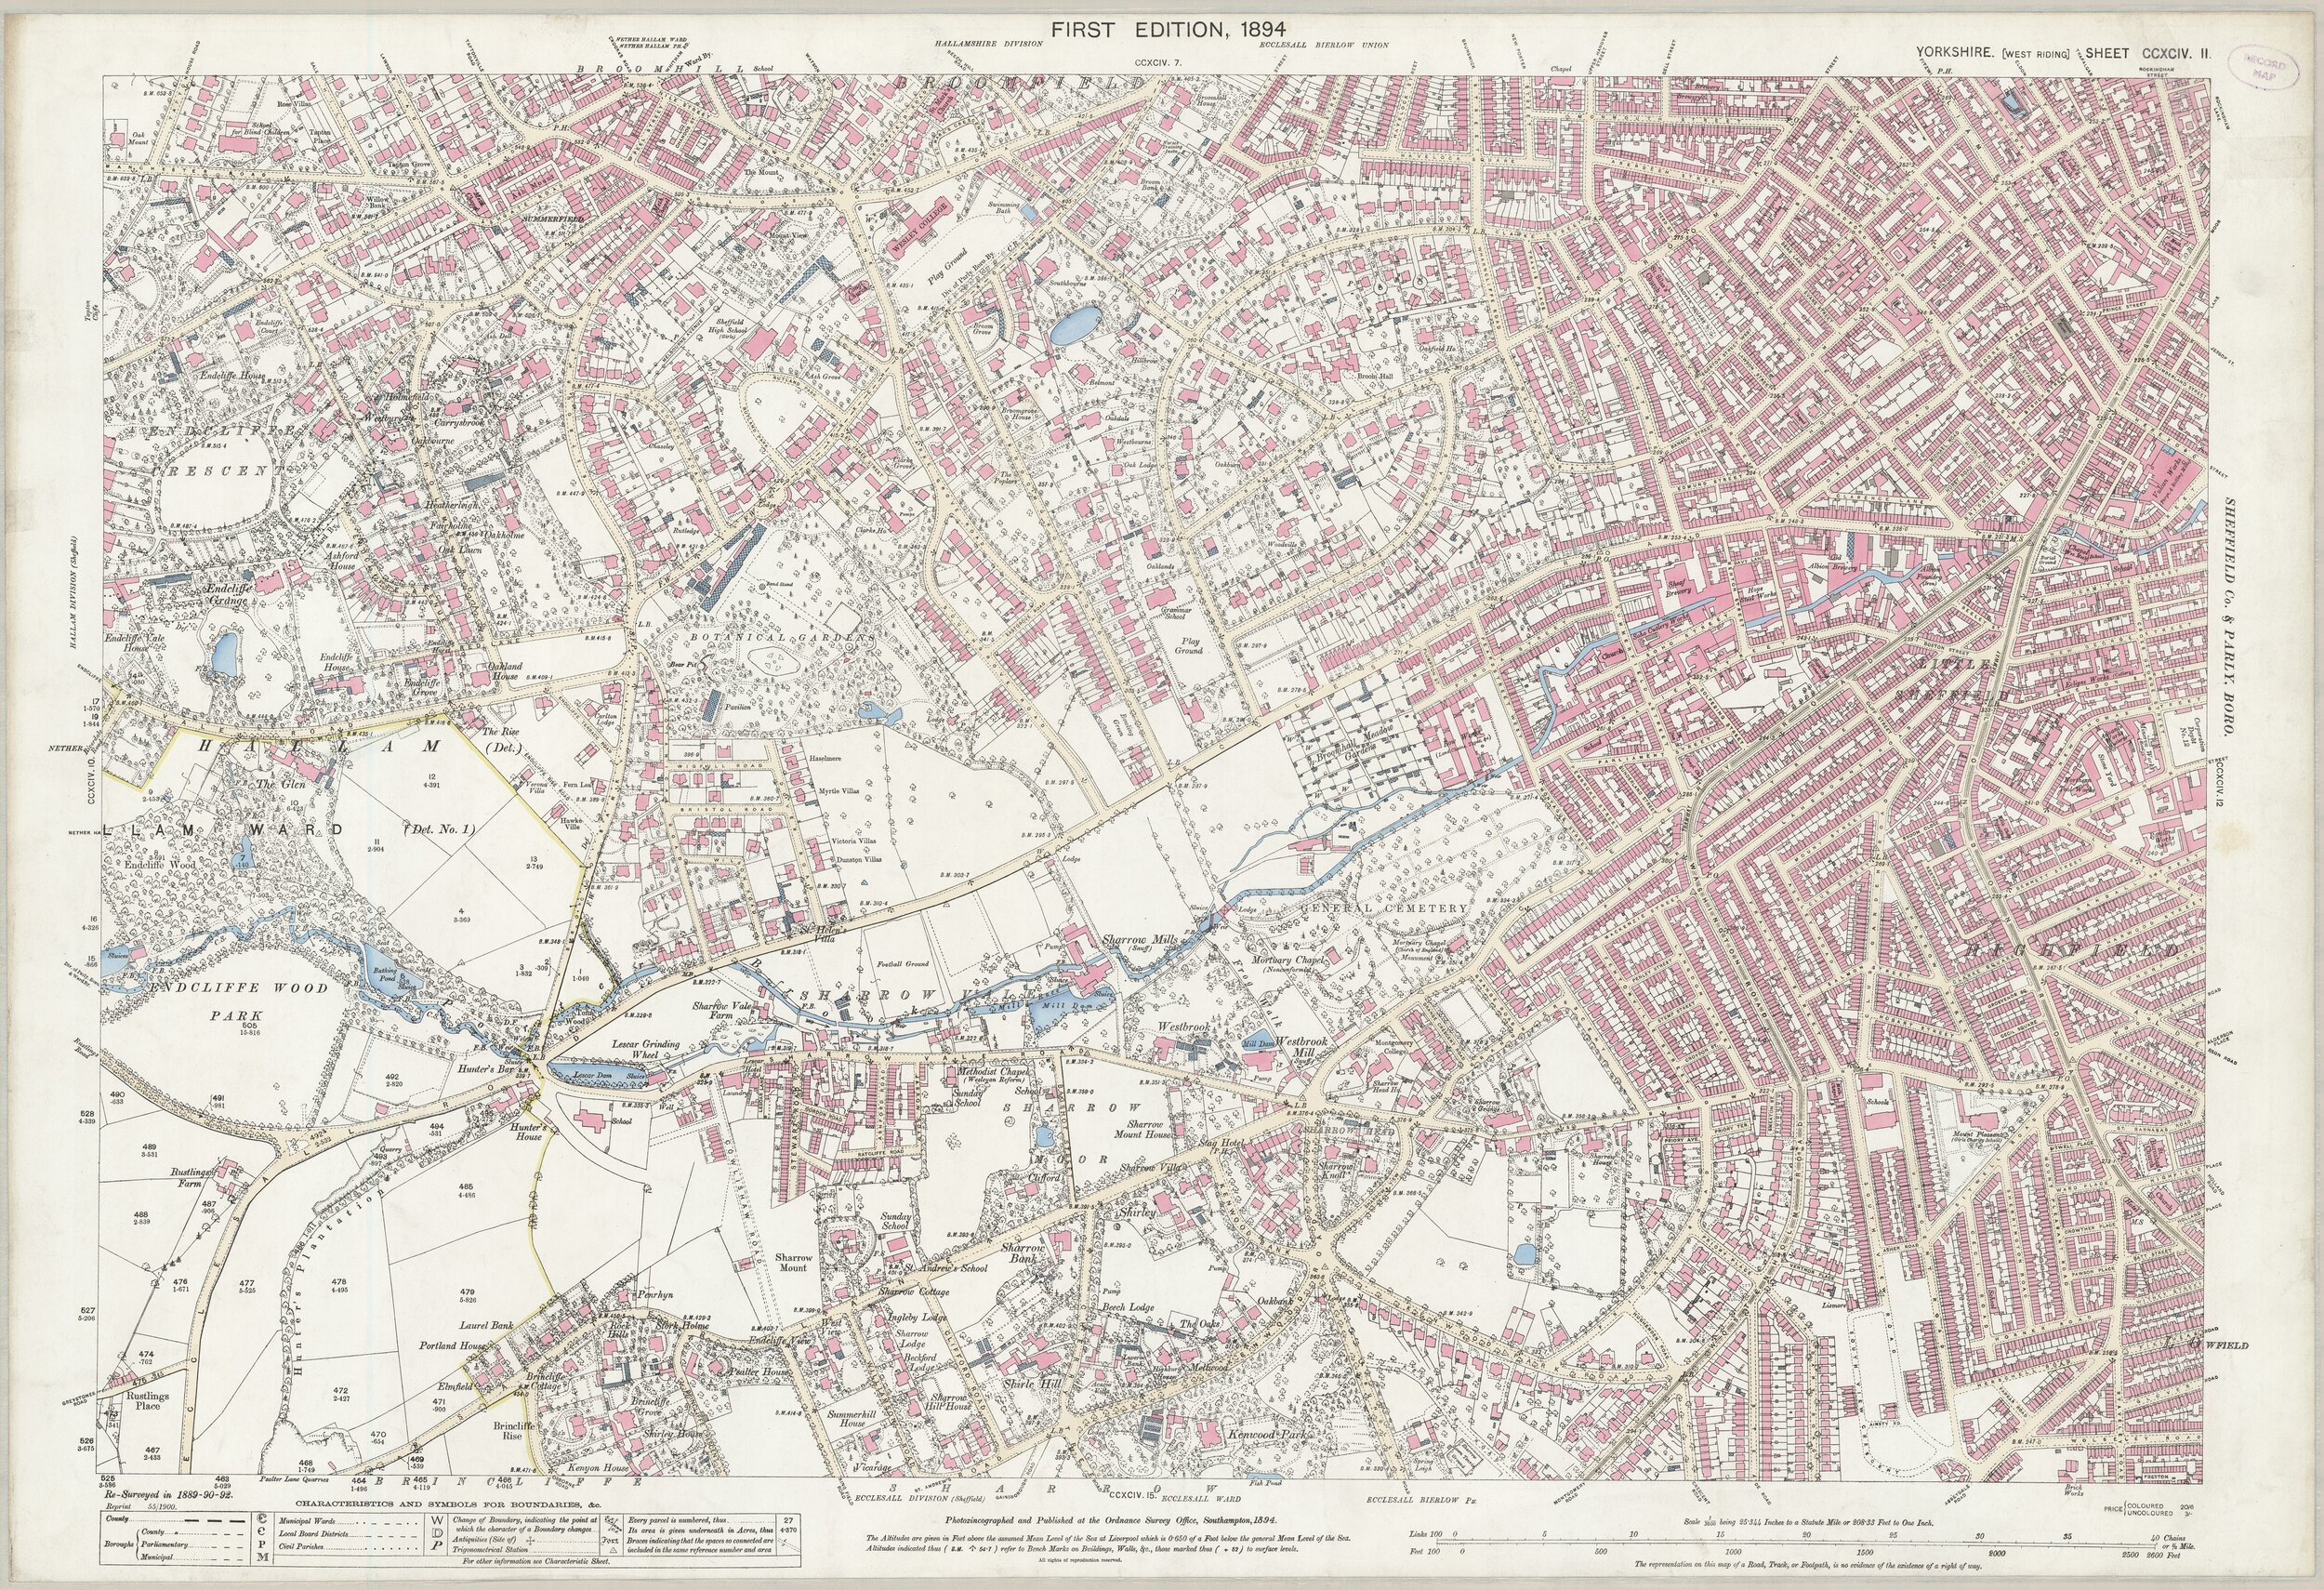 OS Map of Broomgrove Road and Surrounding Areas - 1894